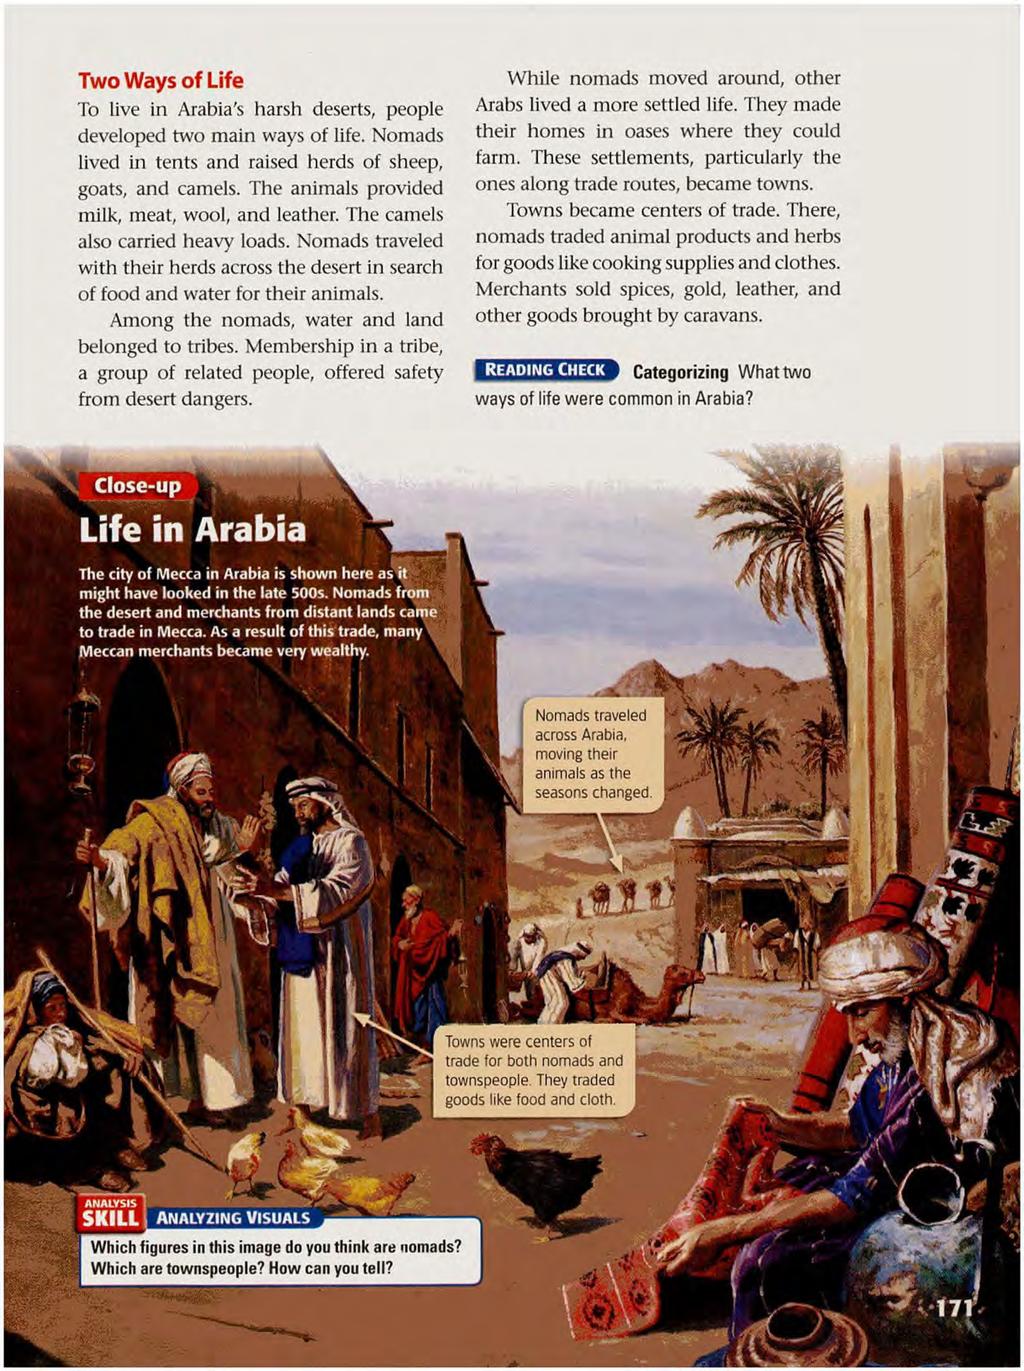 Two Ways o f Life To live in Arabia's harsh deserts, people developed two main ways of life. Nomads lived in tents and raised herds of sheep, goats, and camels.